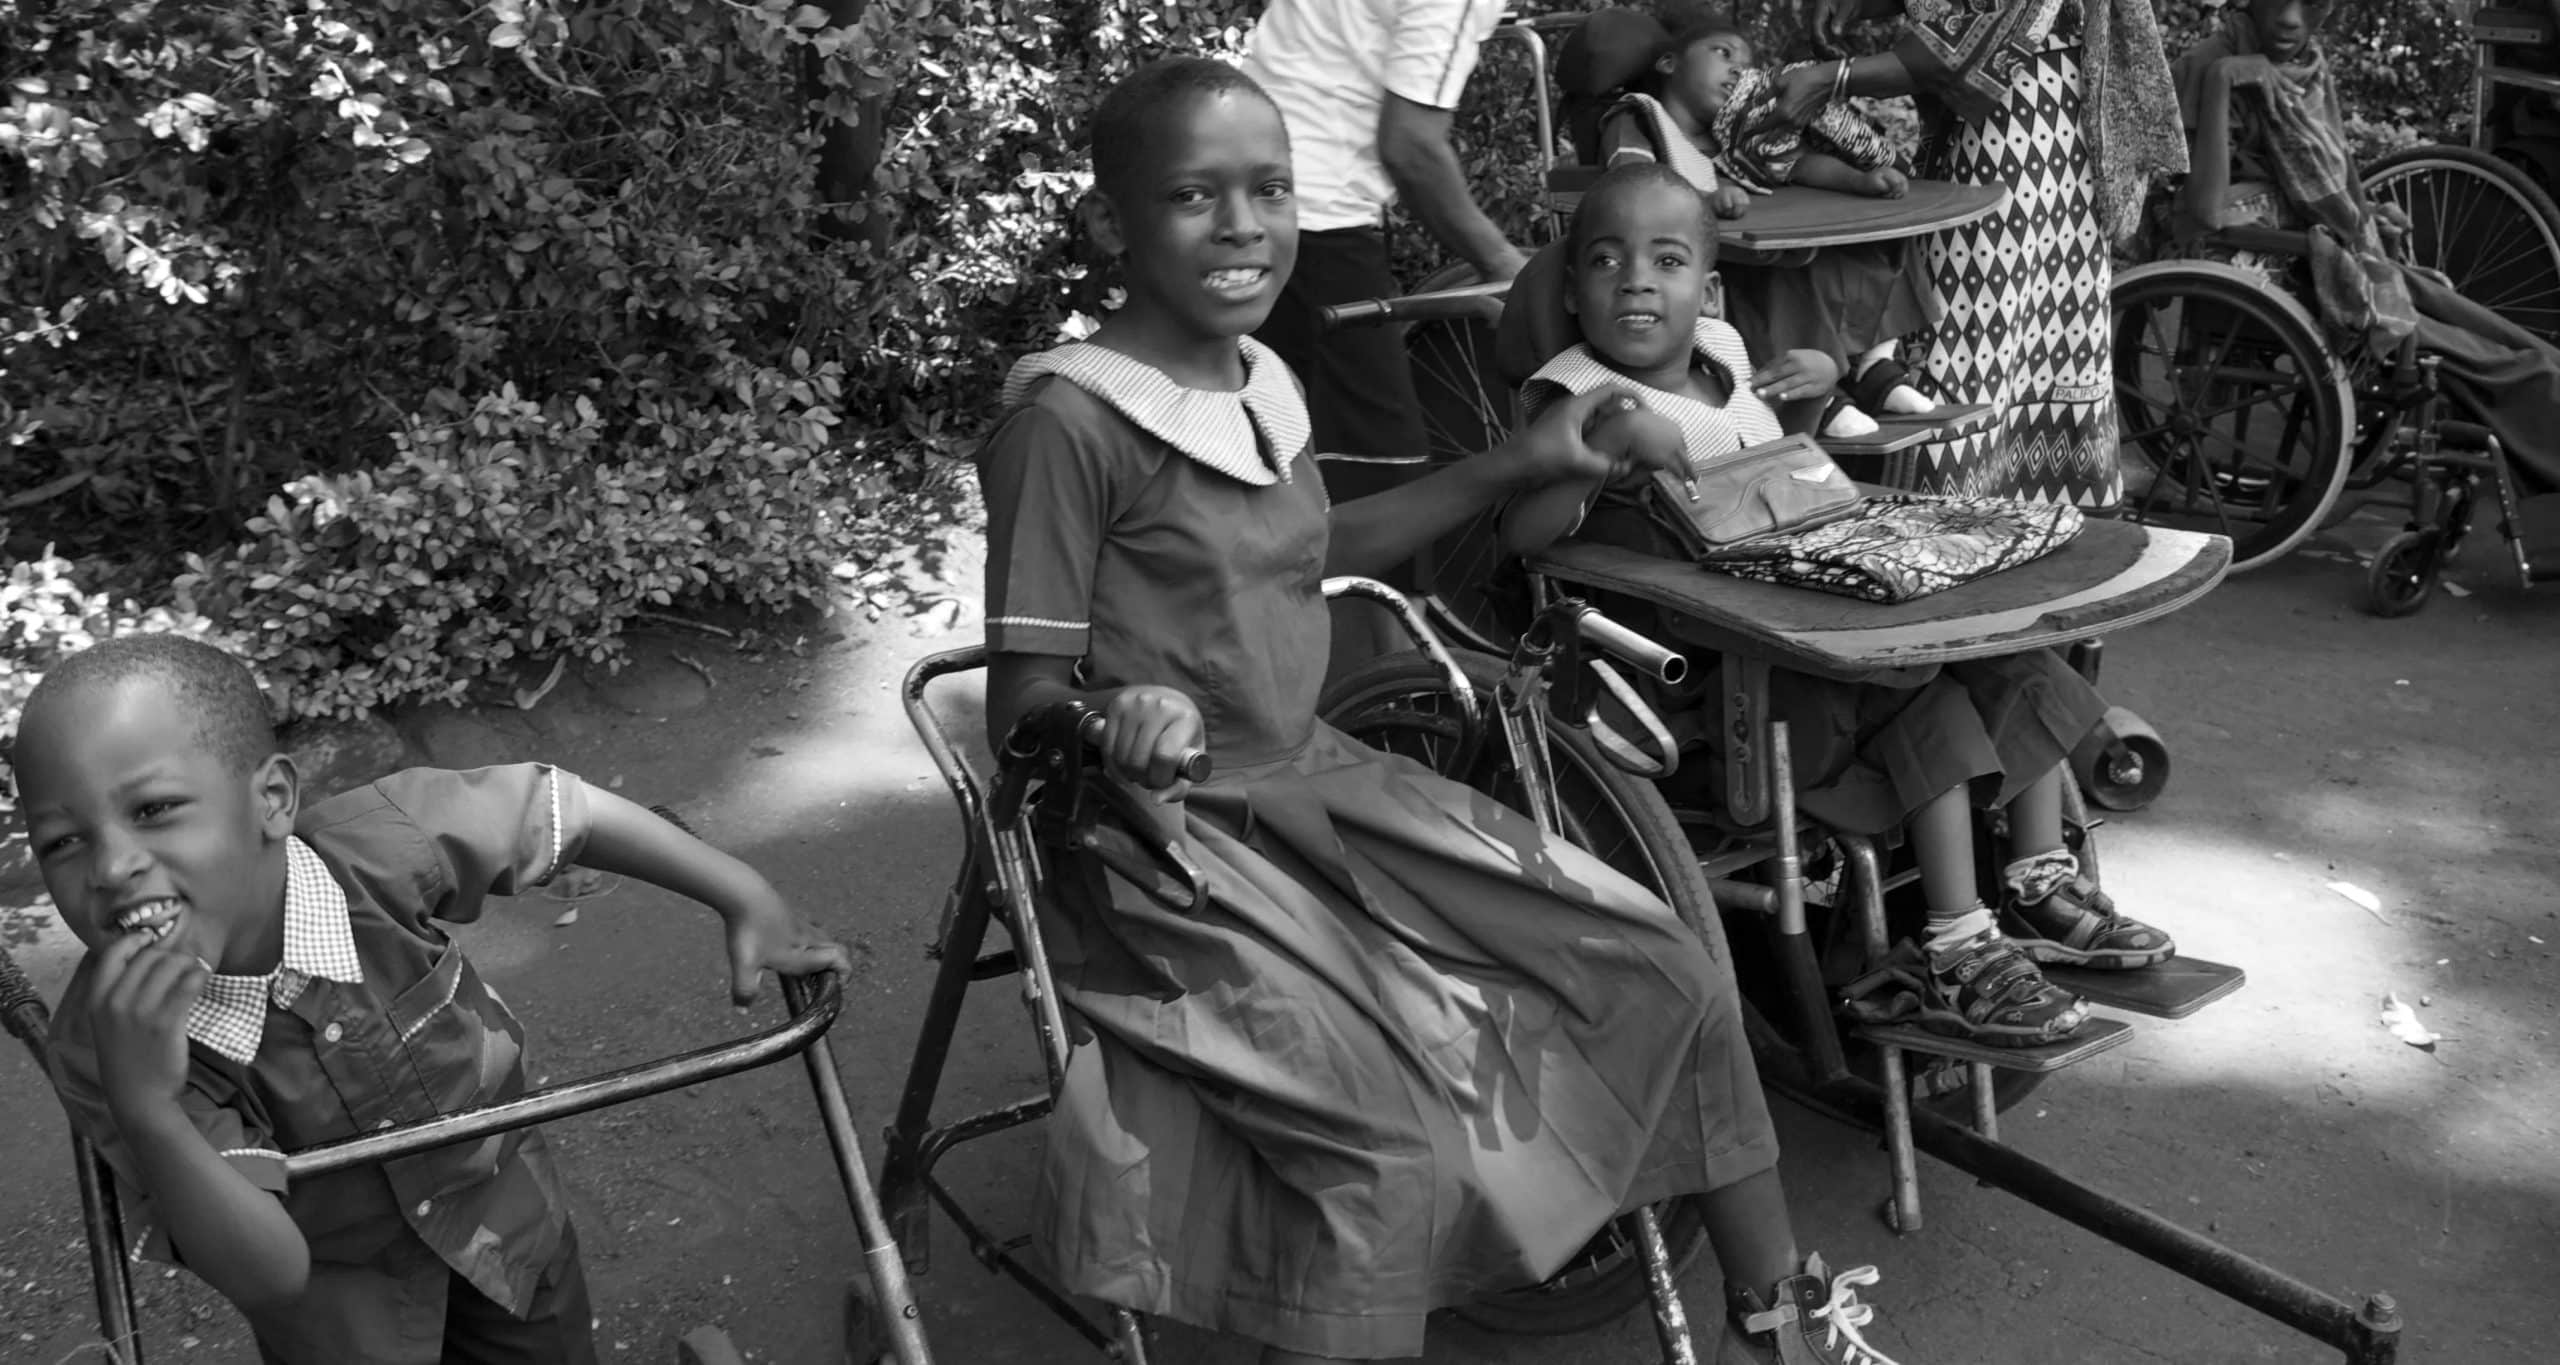 Children with disability at the Carman International Fellowship in Tanzania